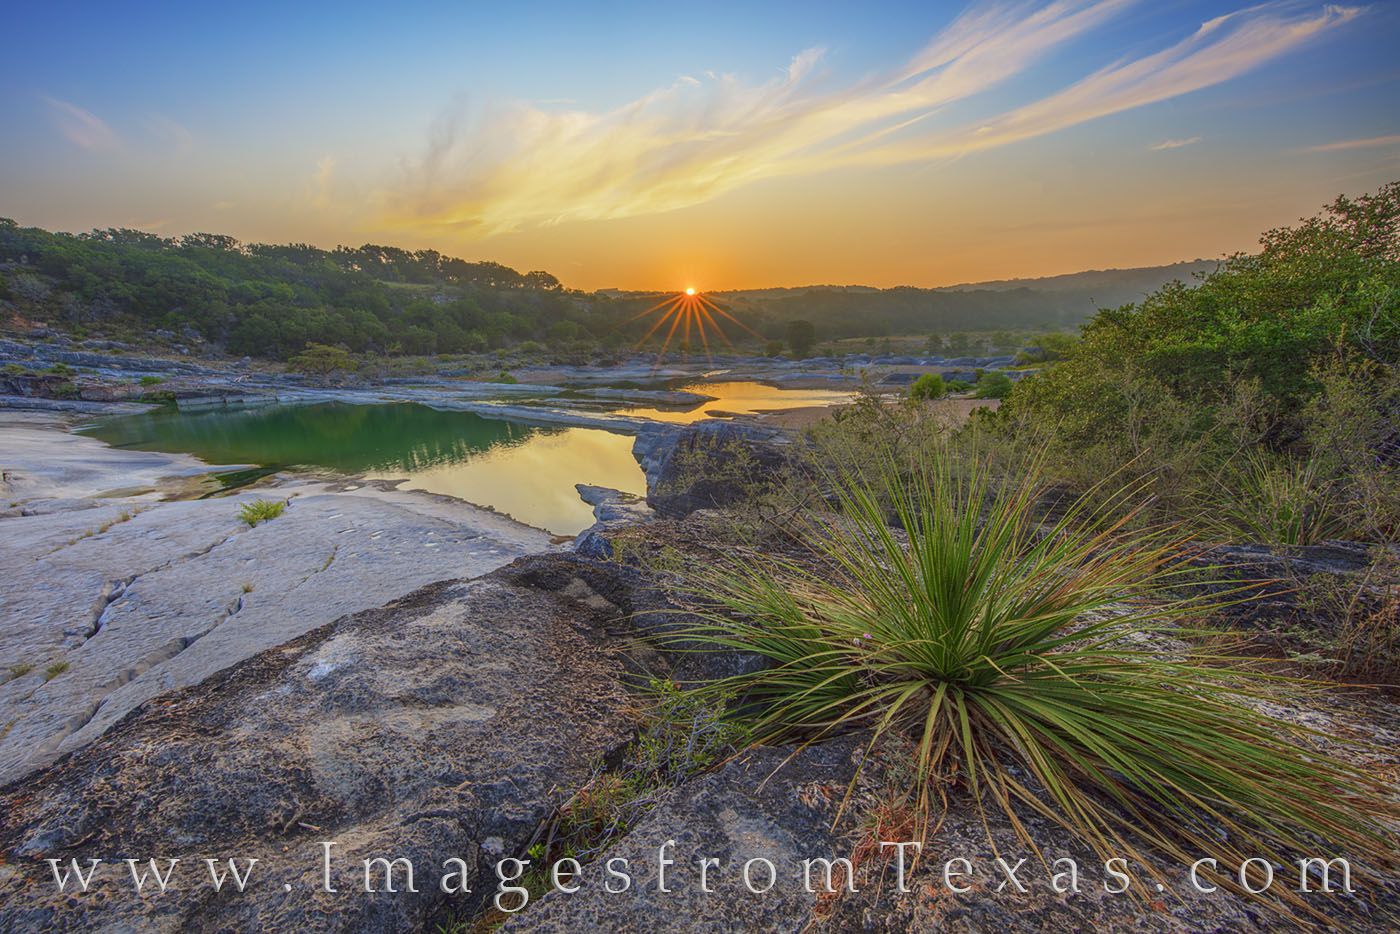 It was a fine summer morning in the Texas Hill Country. The air was warm and humid and the waters of the Pedernales River flowed...